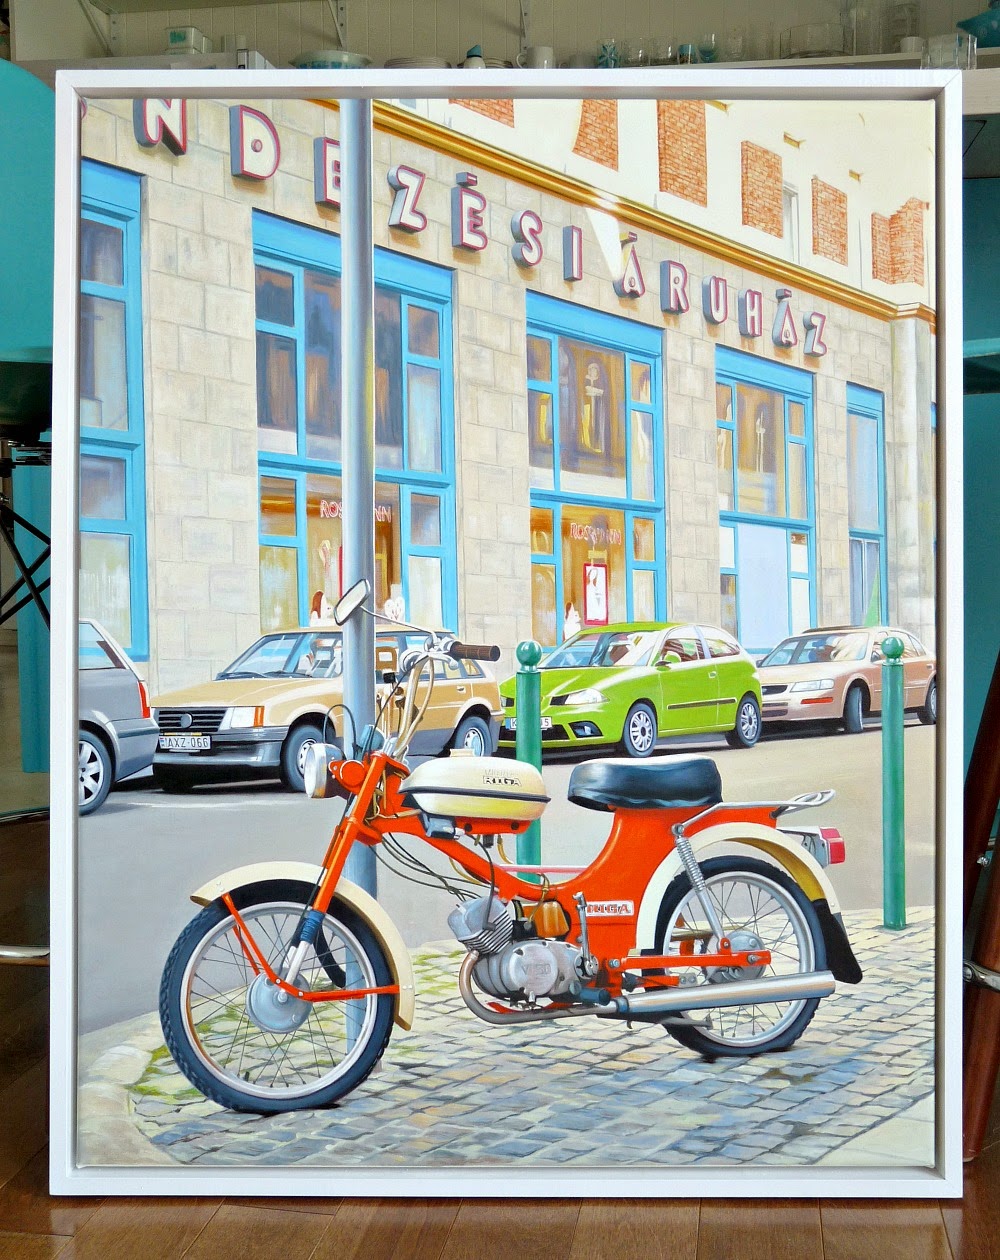 Get a favorite photo turned into an oil painting